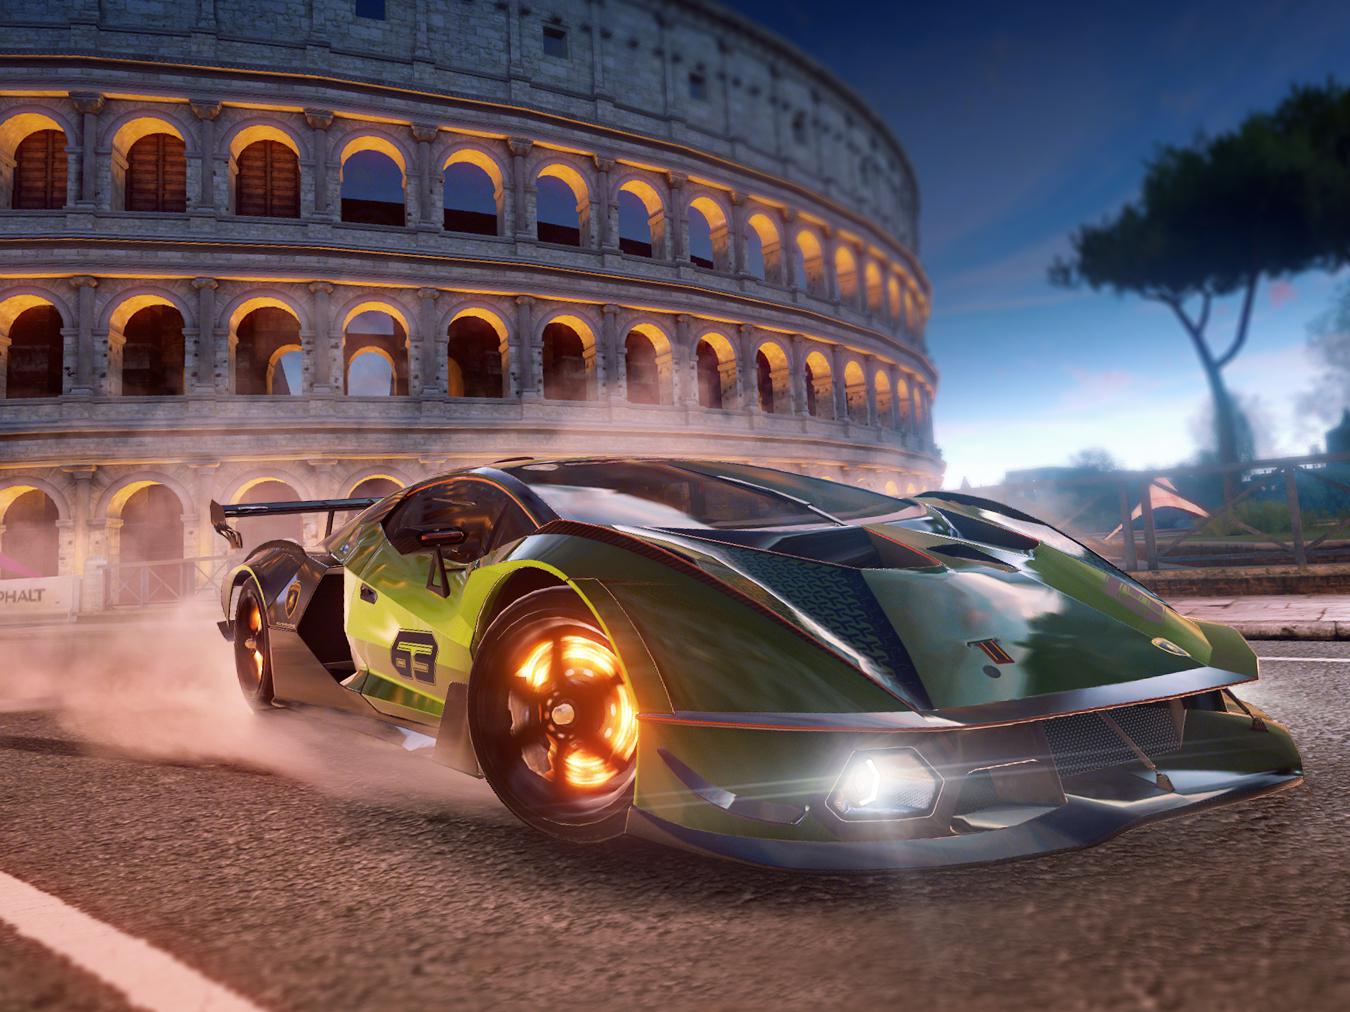 The Lamborghini Essenza SCV12 is a track-only car IRL but it can hit the streets in "Asphalt 9: Legends".